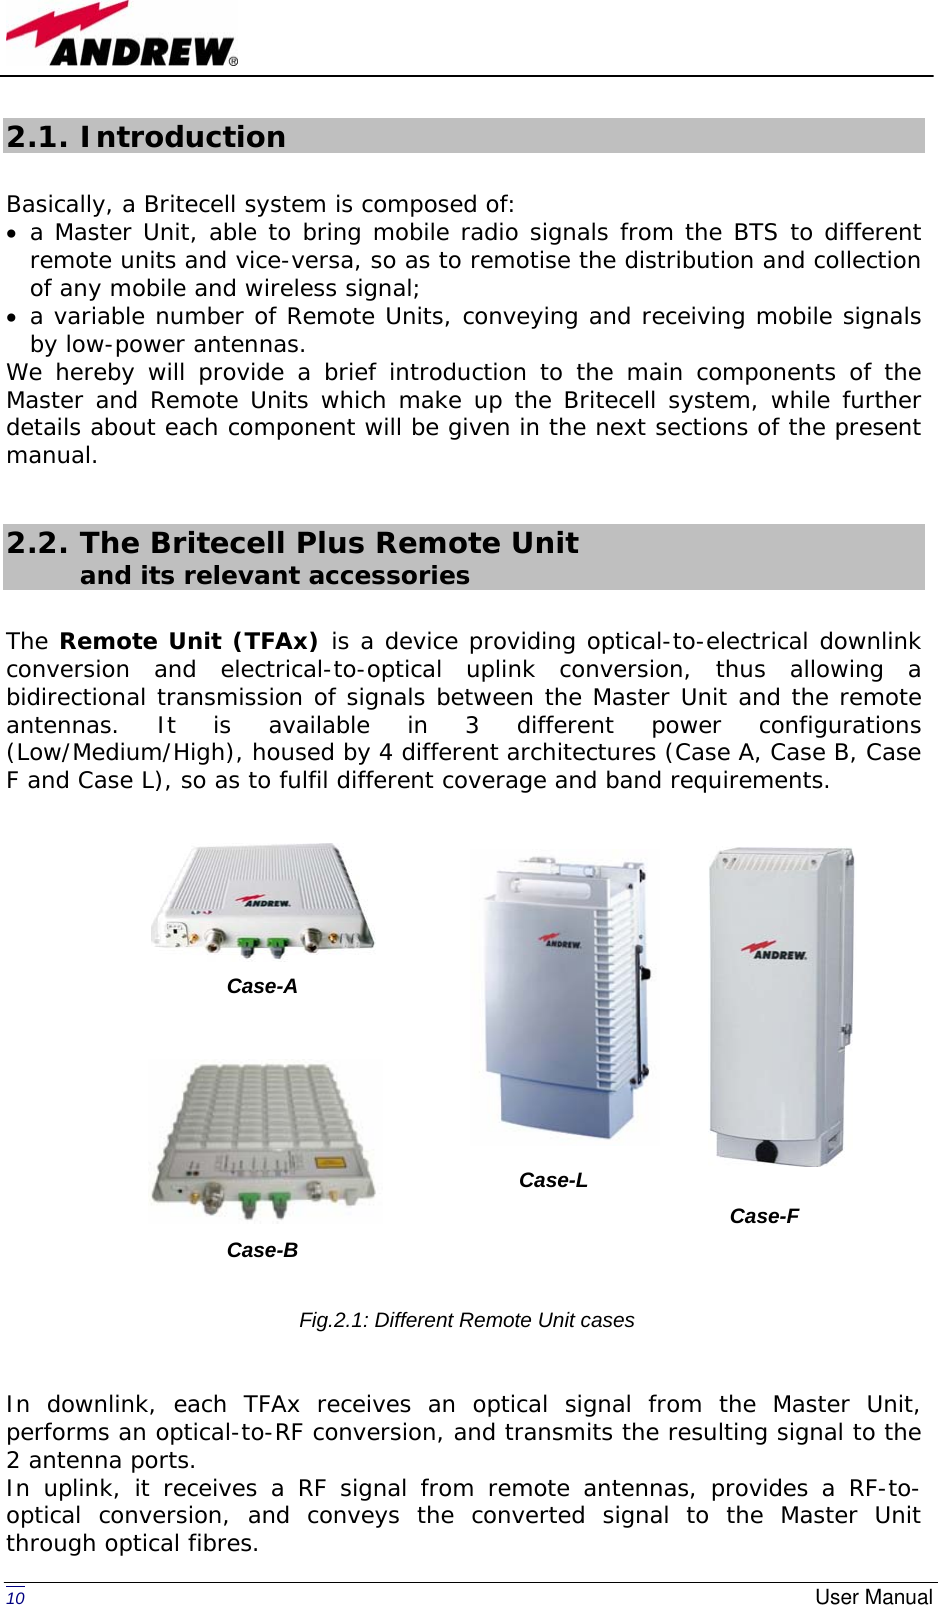   10  User Manual2.1. Introduction  Basically, a Britecell system is composed of: • a Master Unit, able to bring mobile radio signals from the BTS to different remote units and vice-versa, so as to remotise the distribution and collection of any mobile and wireless signal; • a variable number of Remote Units, conveying and receiving mobile signals by low-power antennas. We hereby will provide a brief introduction to the main components of the Master and Remote Units which make up the Britecell system, while further details about each component will be given in the next sections of the present manual.  2.2. The Britecell Plus Remote Unit        and its relevant accessories  The Remote Unit (TFAx) is a device providing optical-to-electrical downlink conversion and electrical-to-optical uplink conversion, thus allowing a bidirectional transmission of signals between the Master Unit and the remote antennas. It is available in 3 different power configurations (Low/Medium/High), housed by 4 different architectures (Case A, Case B, Case F and Case L), so as to fulfil different coverage and band requirements.                  In downlink, each TFAx receives an optical signal from the Master Unit, performs an optical-to-RF conversion, and transmits the resulting signal to the 2 antenna ports.  In uplink, it receives a RF signal from remote antennas, provides a RF-to-optical conversion, and conveys the converted signal to the Master Unit through optical fibres. Case-A Case-B Case-LCase-F Fig.2.1: Different Remote Unit cases